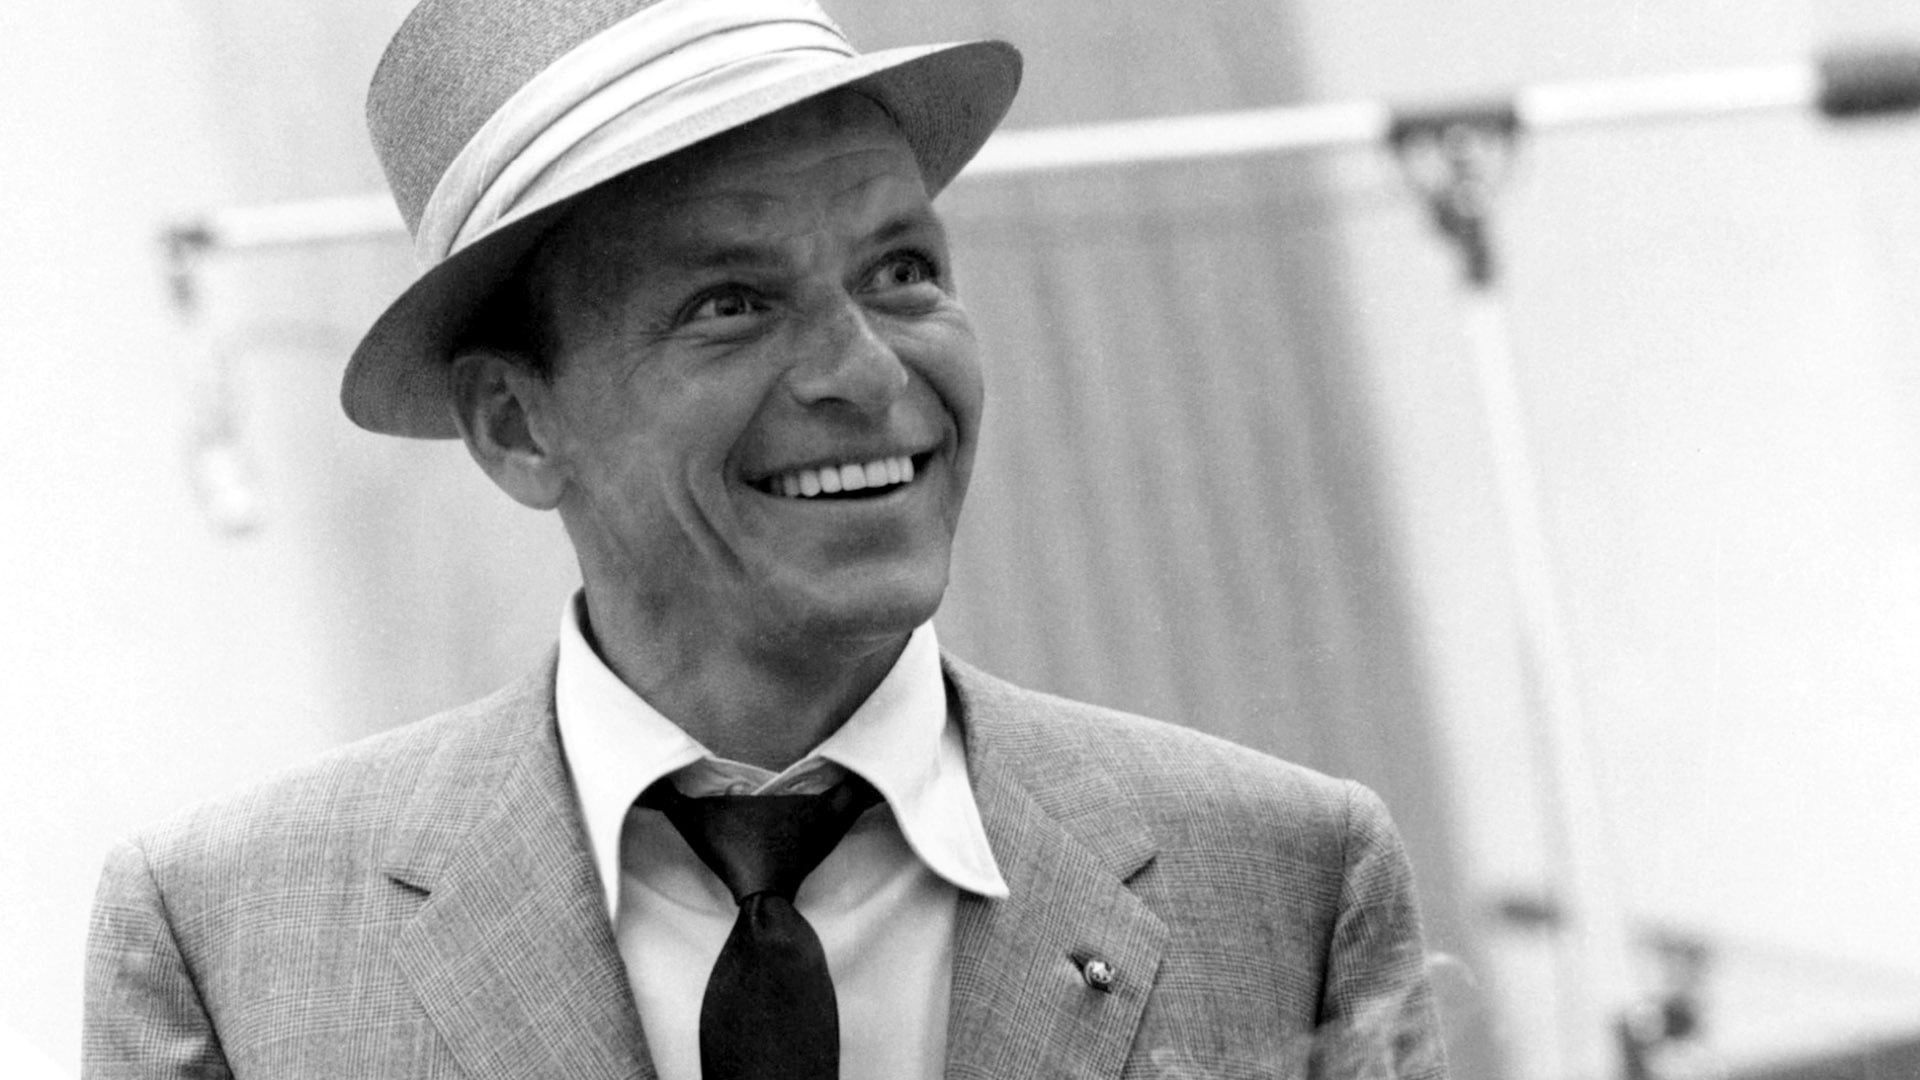 man wearing suit jacket and hat photo, frank sinatra, smile, tie